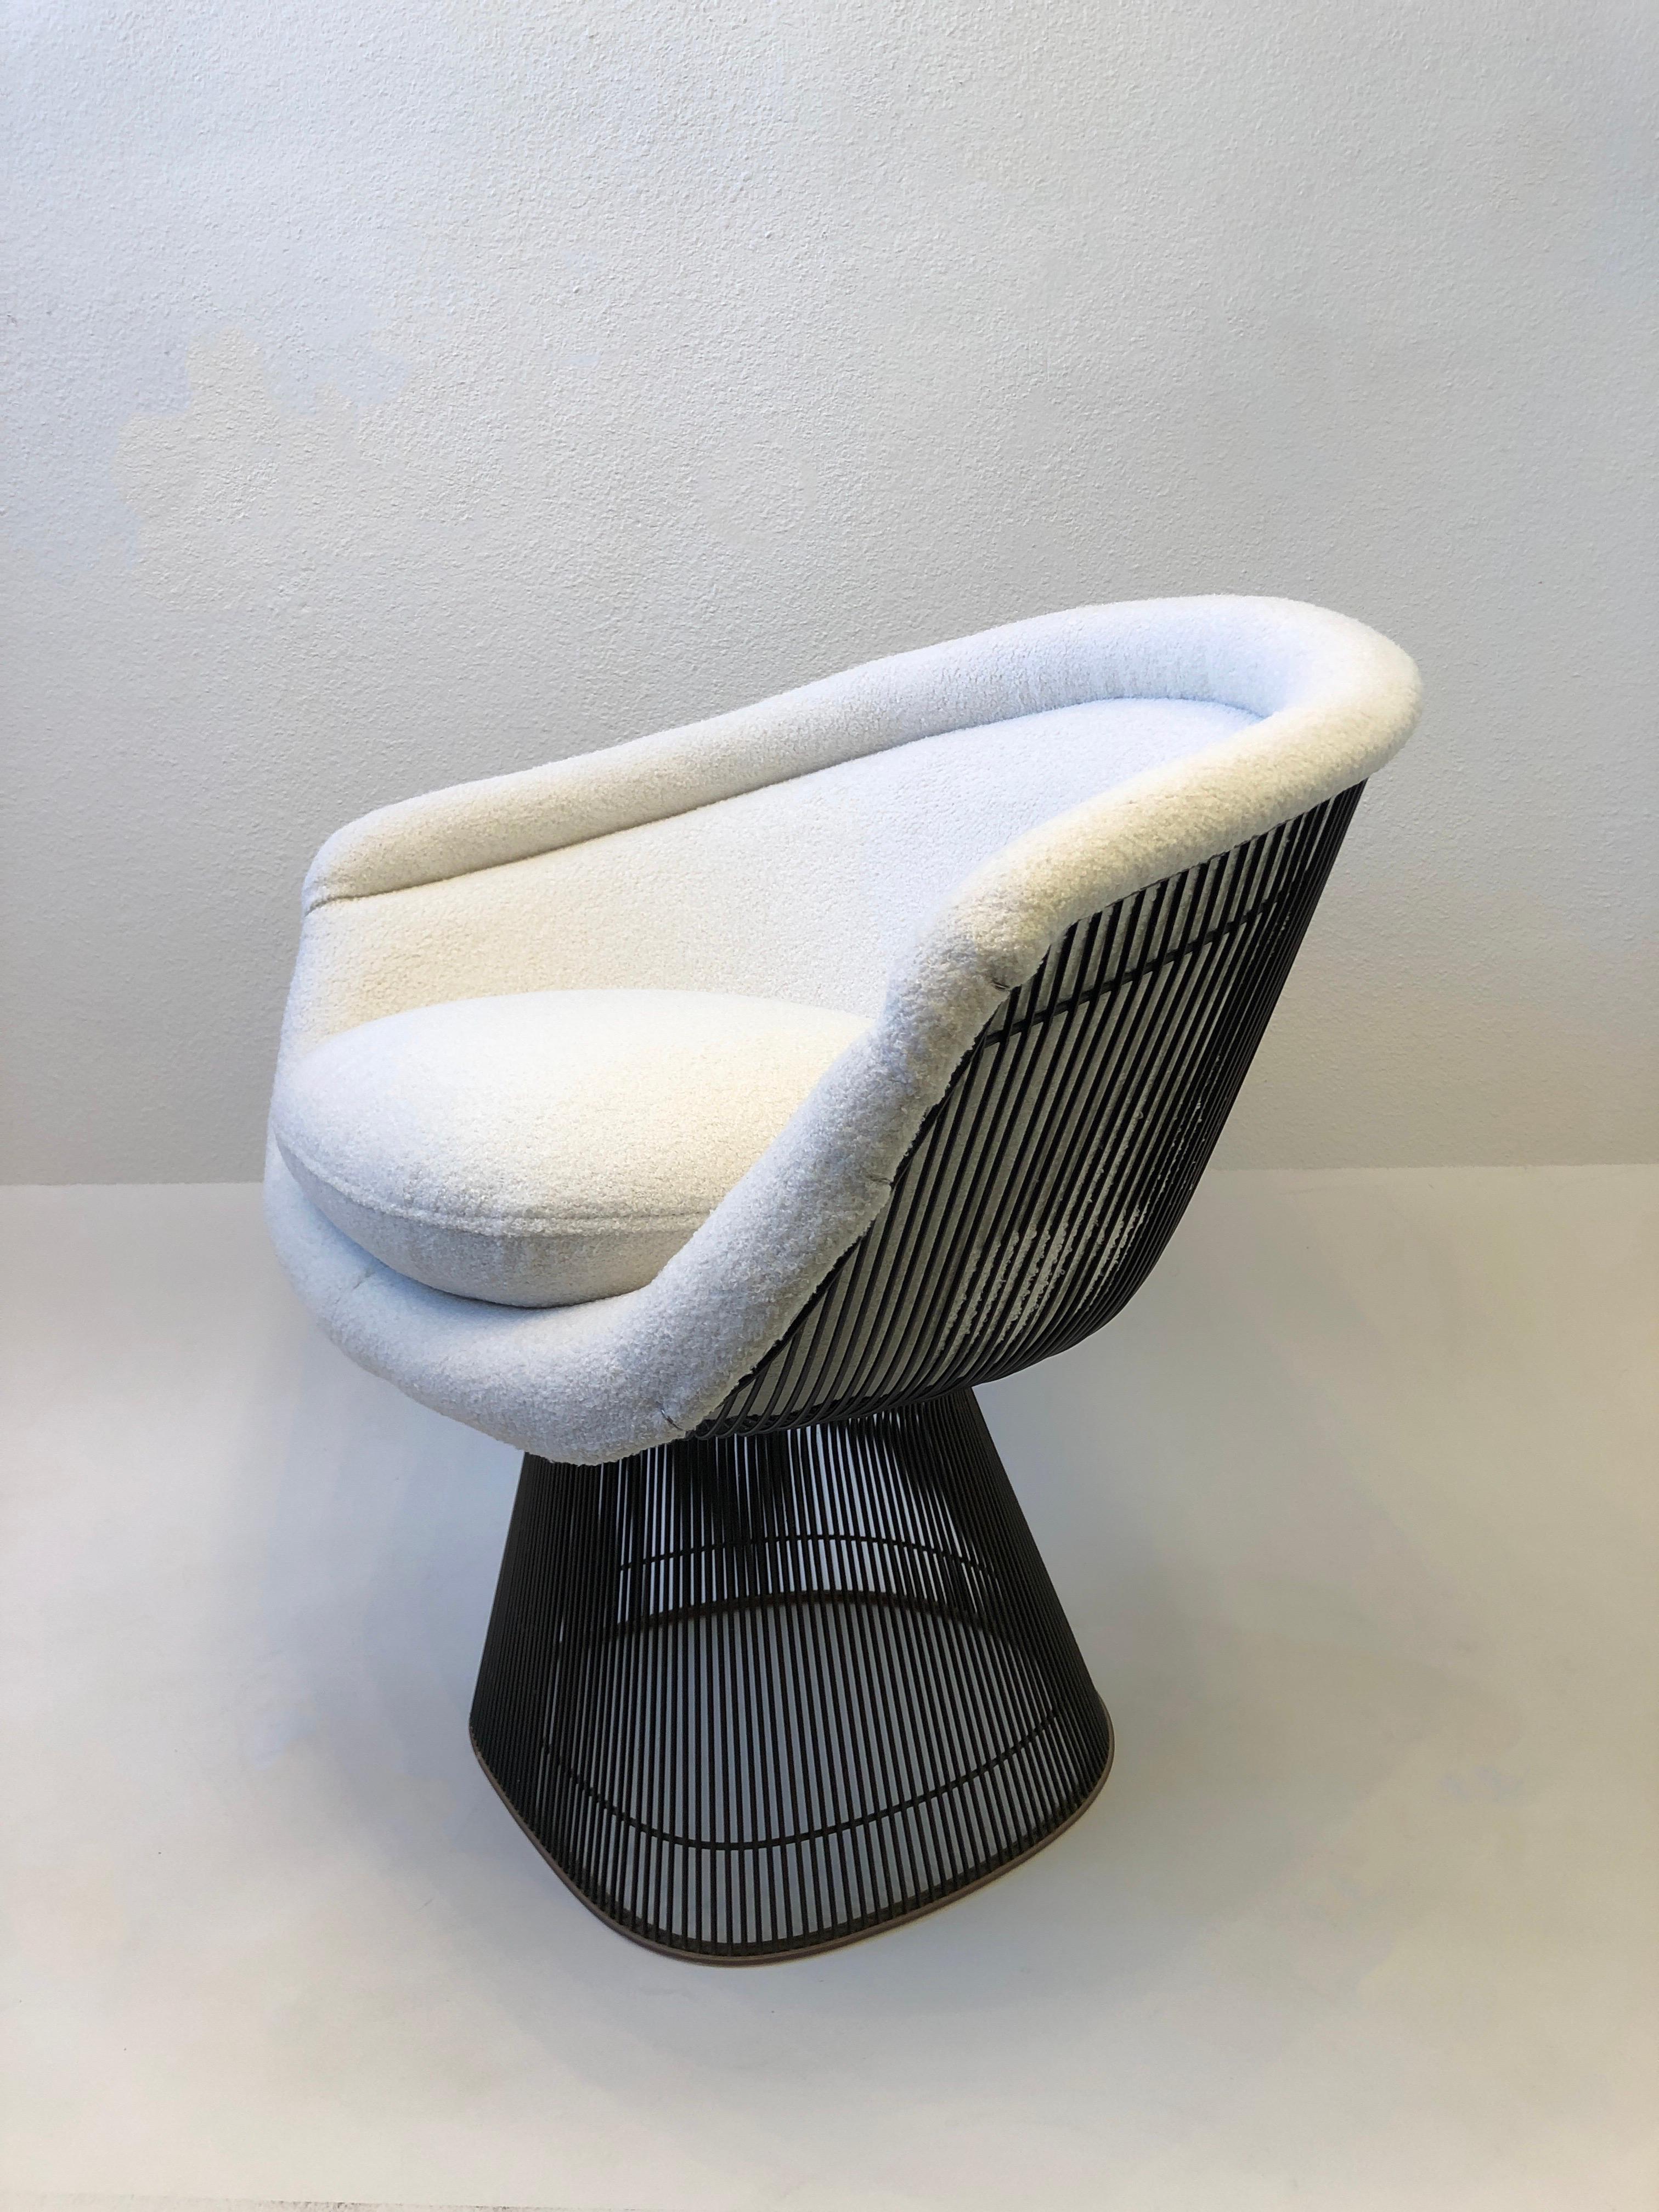 Iconic 1960’s Bronze lounge chair by Warren Platner for Knoll.
Newly recovered in a soft Boucle fabric. Retains original knoll label.
The frame is in original condition, so it show minor wear consistent with age. 
Measurements: 36” Wide, 24”